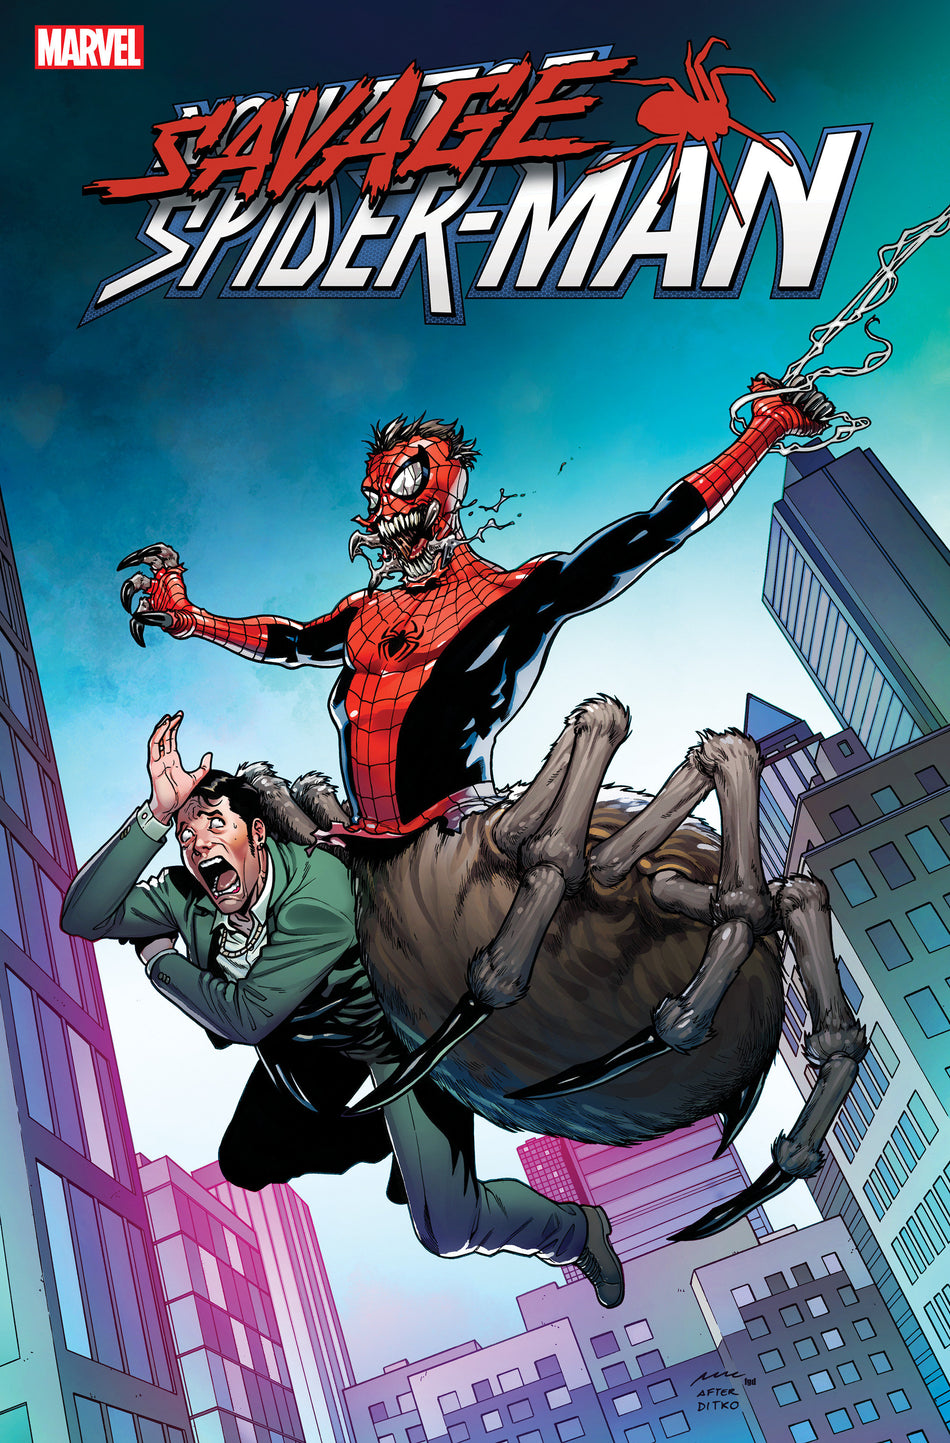 Image of Savage Spider-Man 1 Tbd Artist Variant comic sold by Stronghold Collectibles.